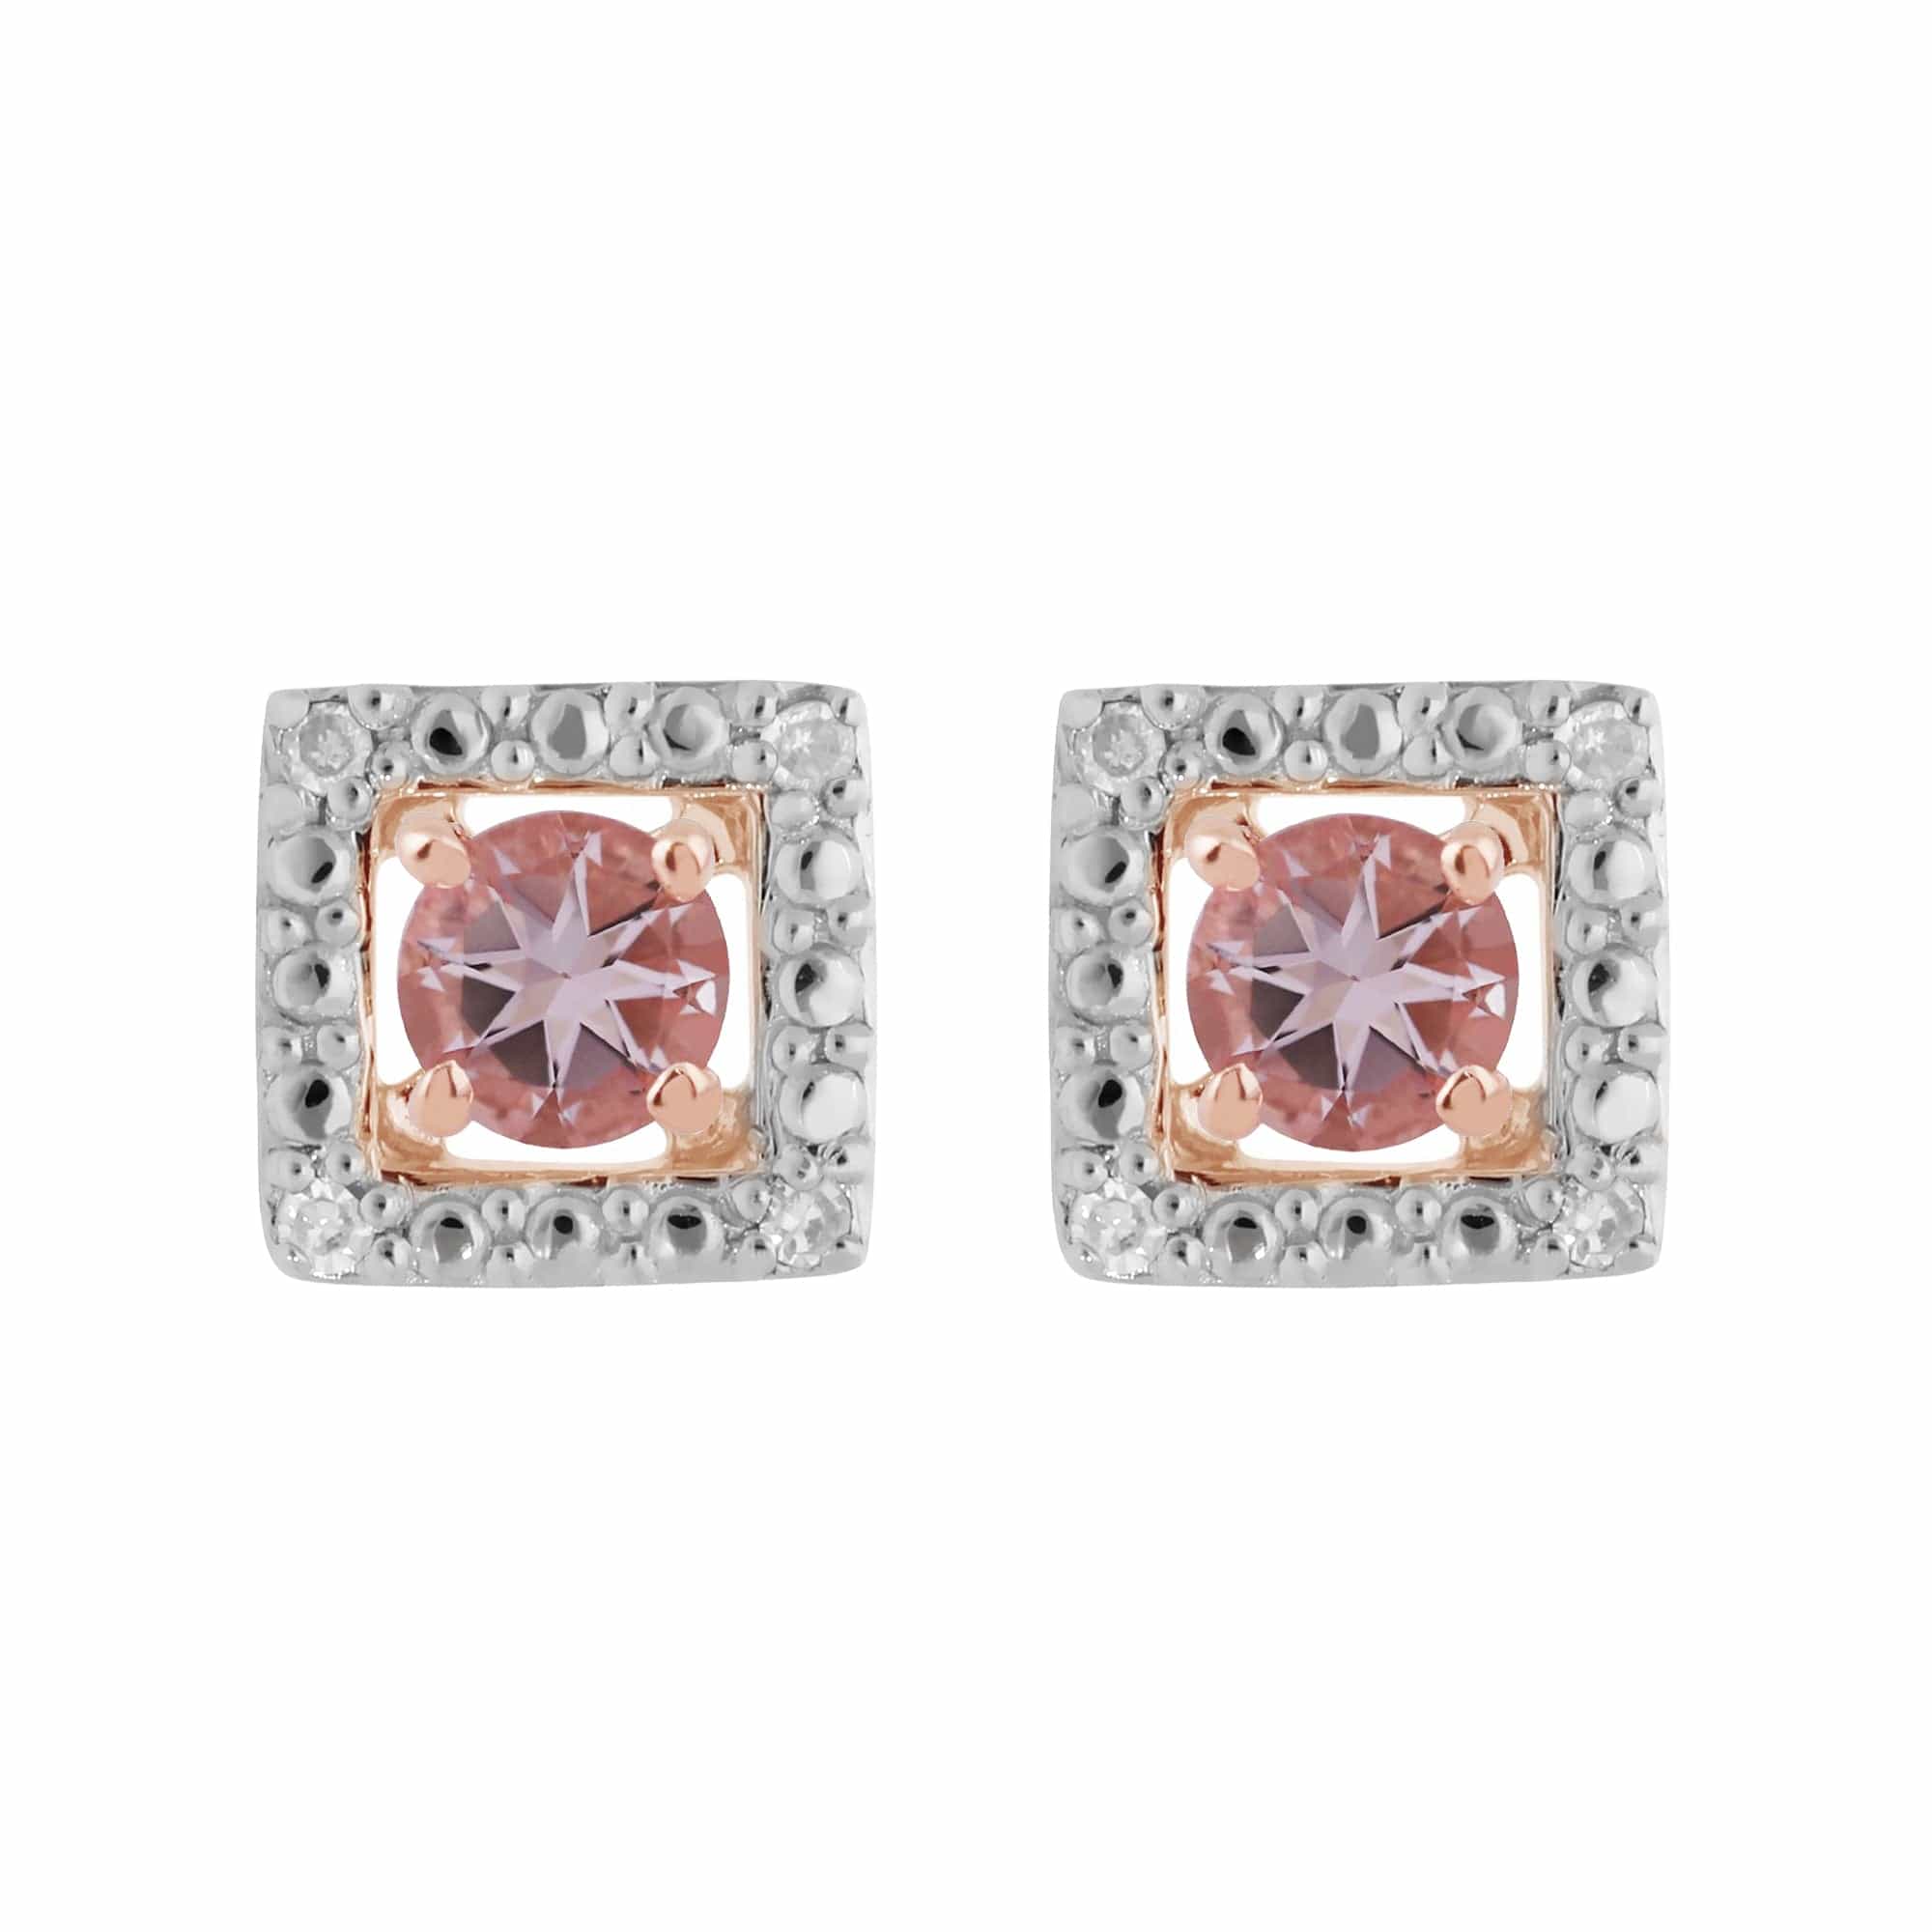 183E4316019-191E0380019 Classic Round Morganite Stud Earrings with Detachable Diamond Square Ear Jacket in 9ct Rose Gold 1